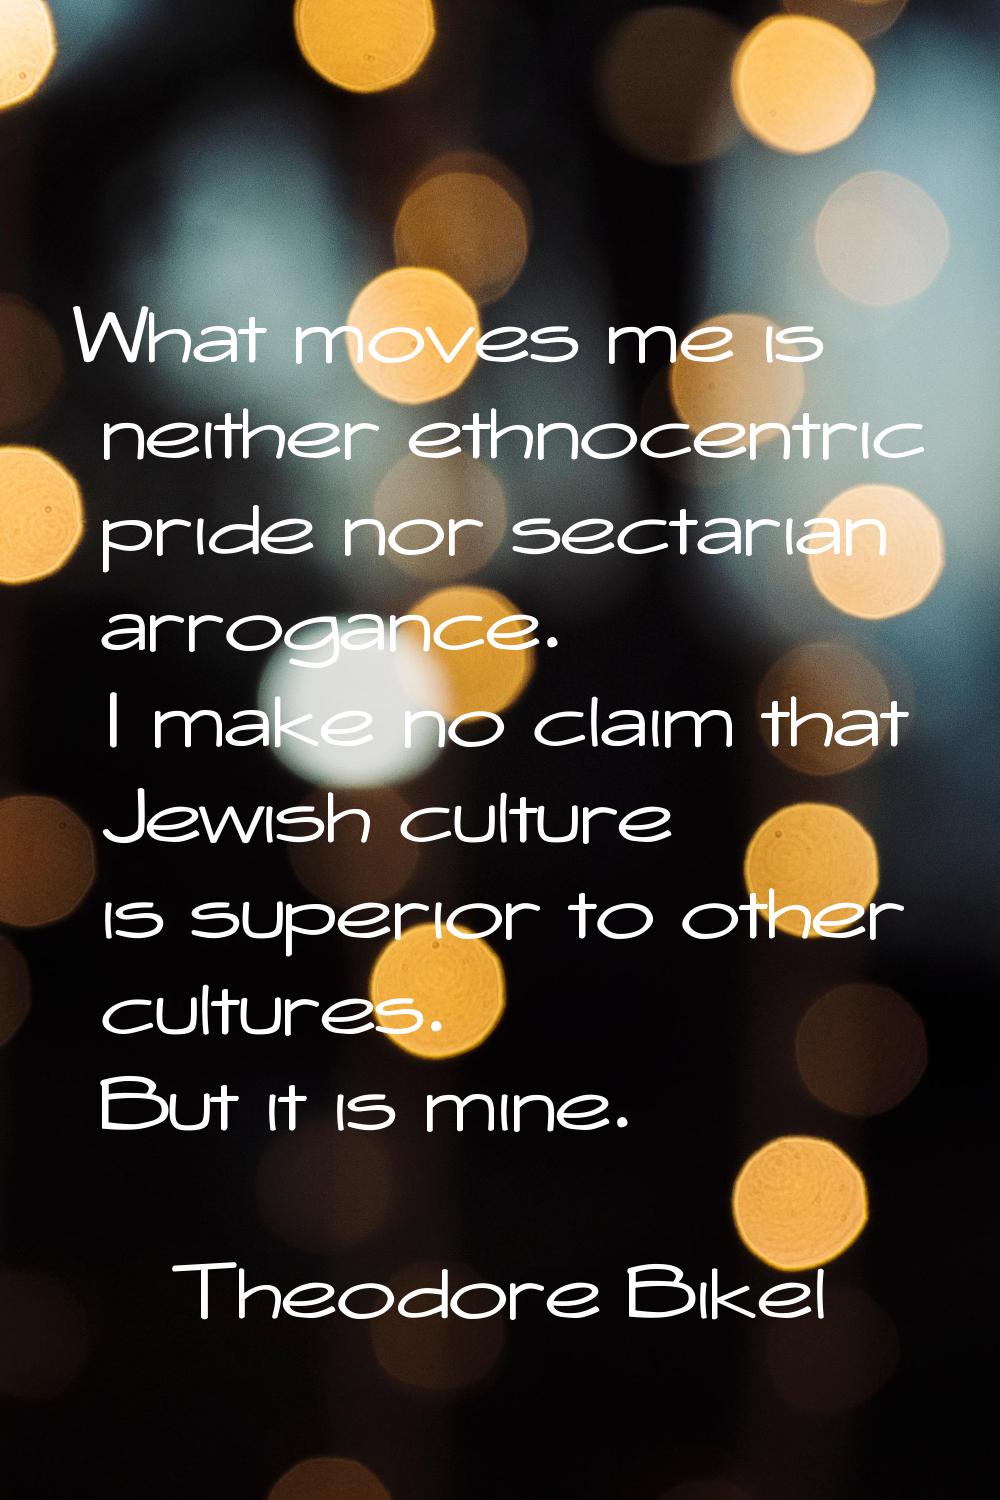 What moves me is neither ethnocentric pride nor sectarian arrogance. I make no claim that Jewish cu